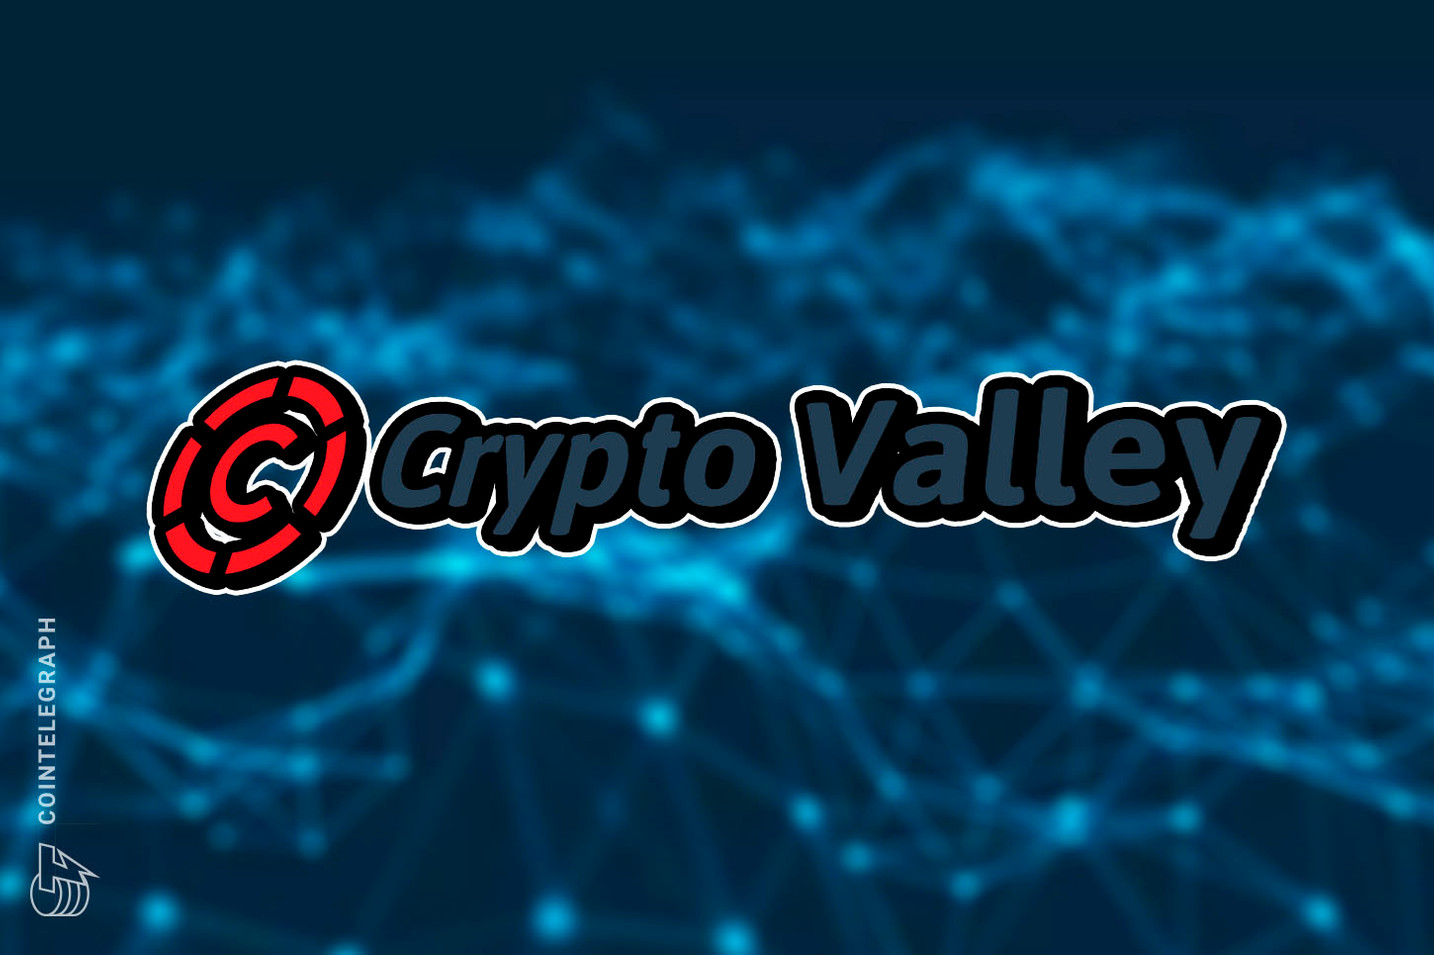 Crypto Valley Association explores crypto vaults in its latest event